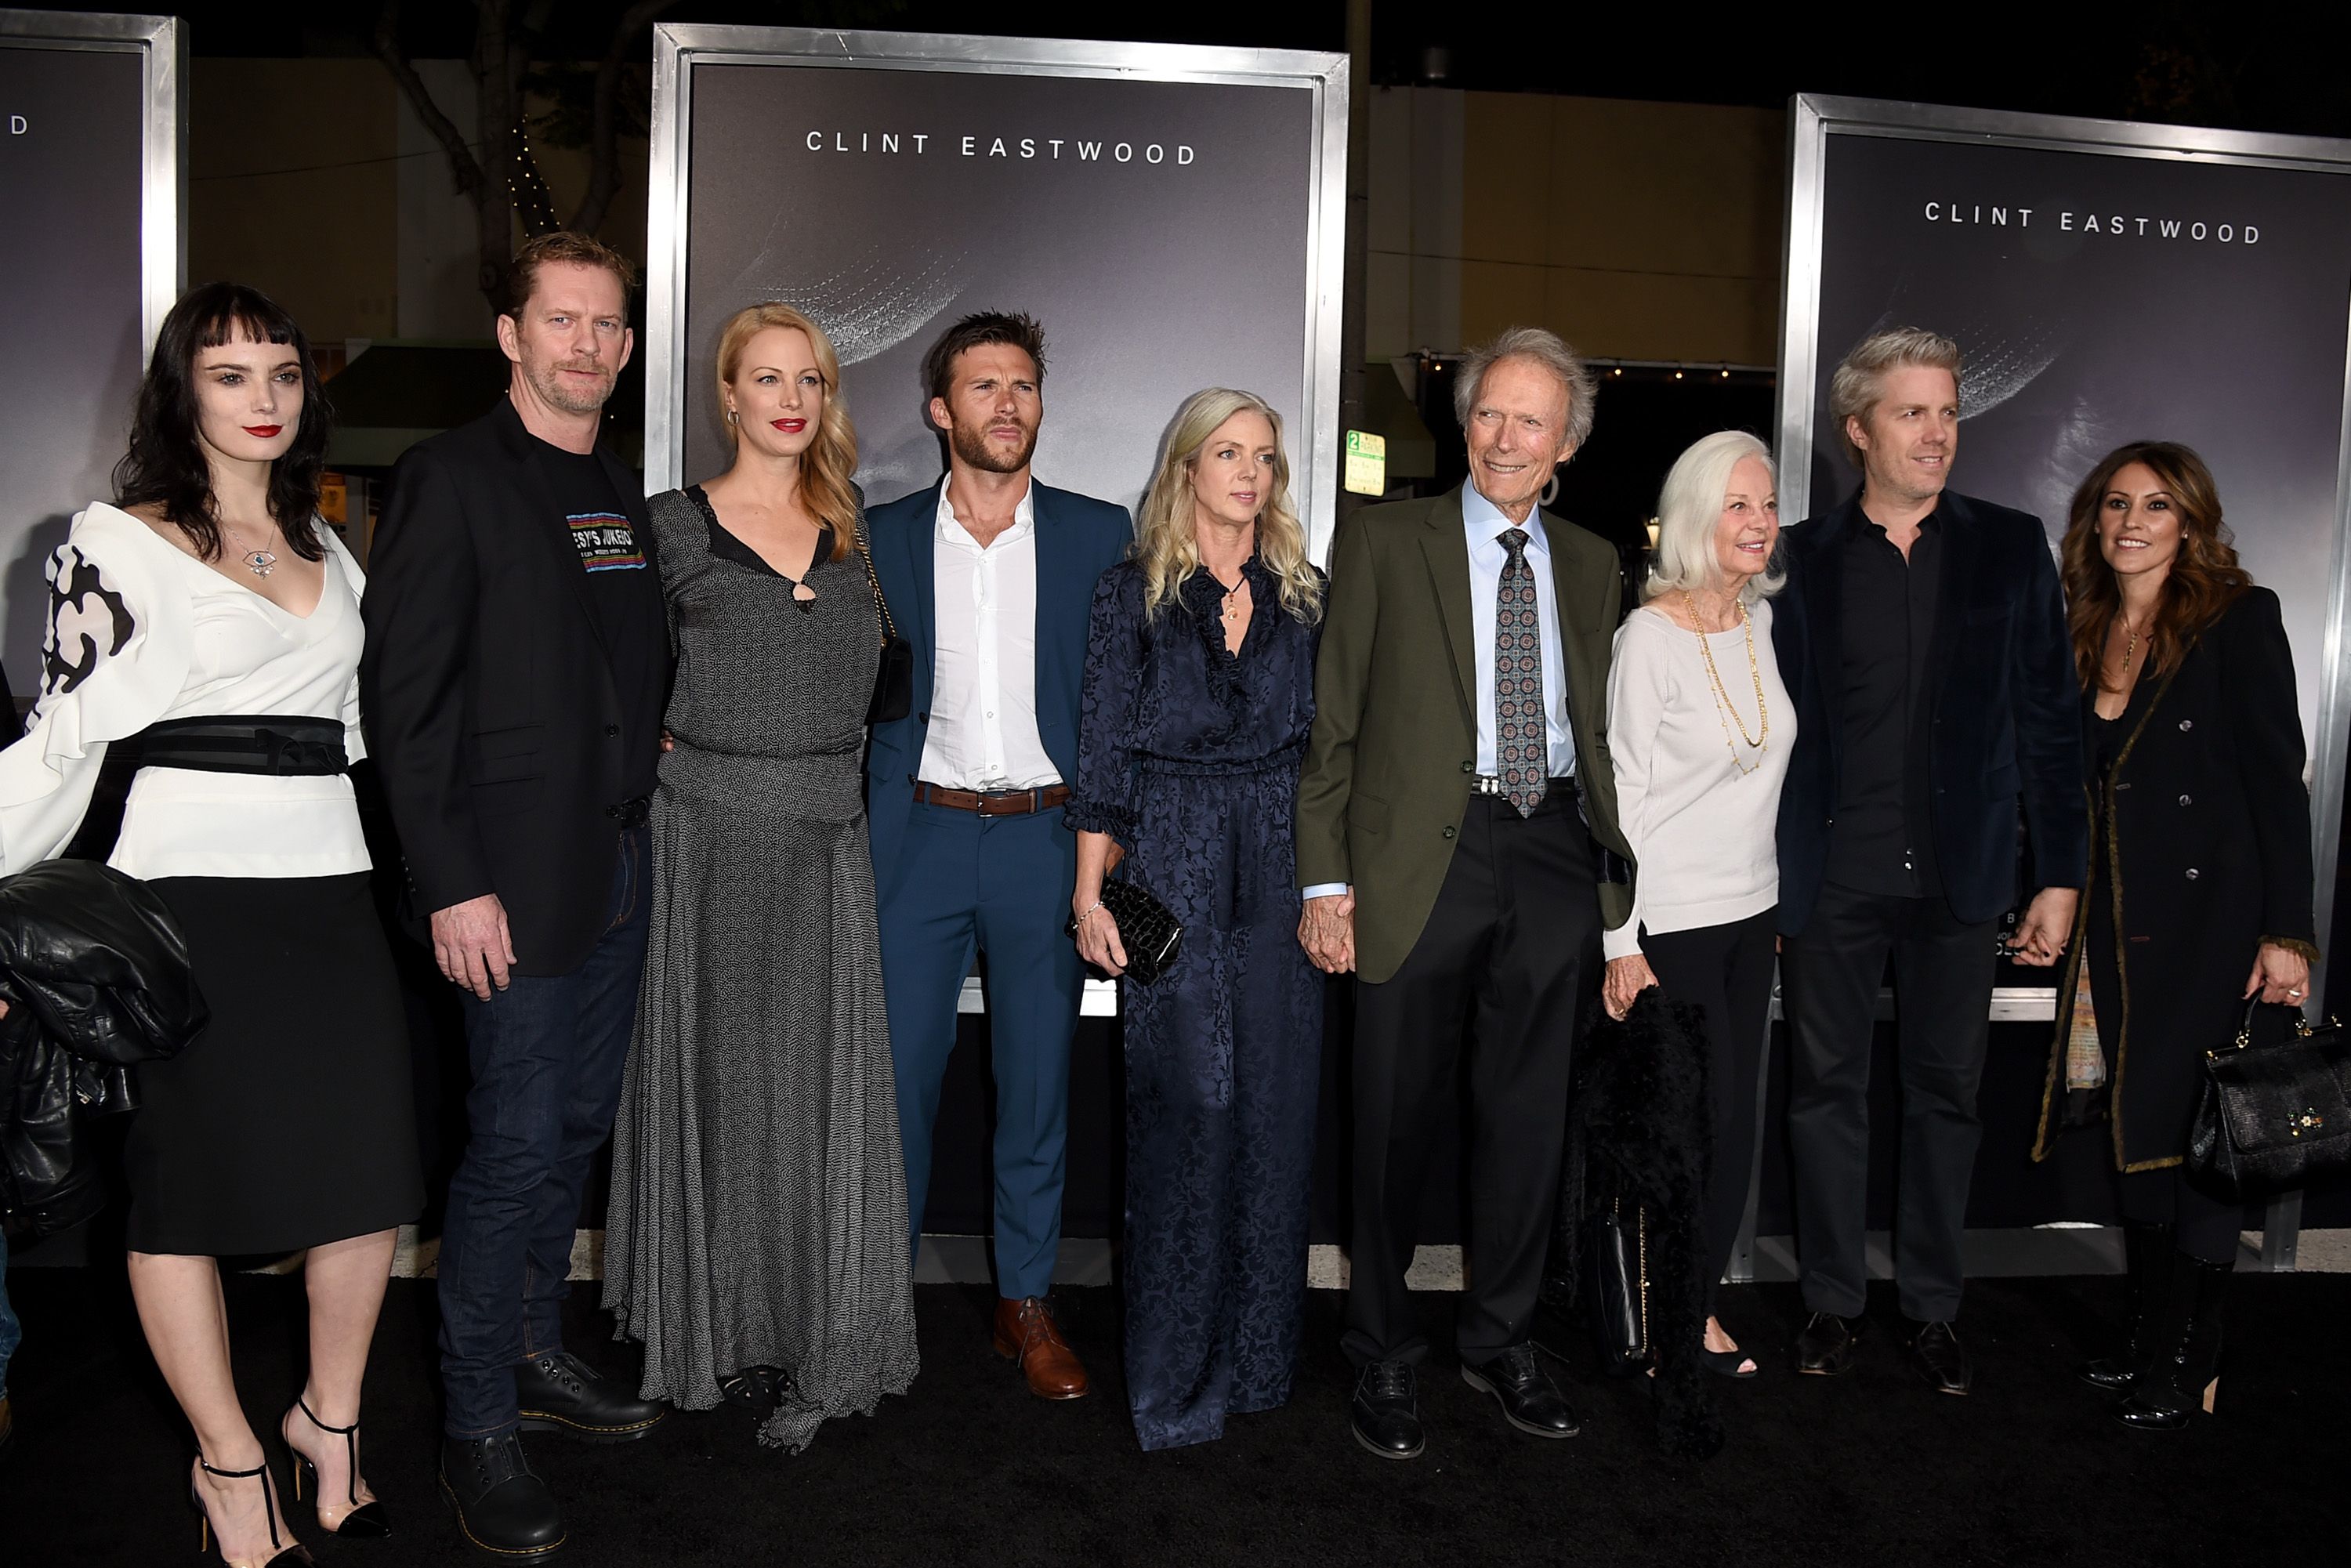 Graylen Eastwood, Stacy Poitras, Alison Eastwood, Scott Eastwood, Christina Sandera, Clint Eastwood, Maggie Johnson, Kyle Eastwood and Cynthia Ramirez pose at the premiere of Warner Bros. Pictures' "The Mule" at the Village Theatre on December 10, 2018 | Photo: Getty Images